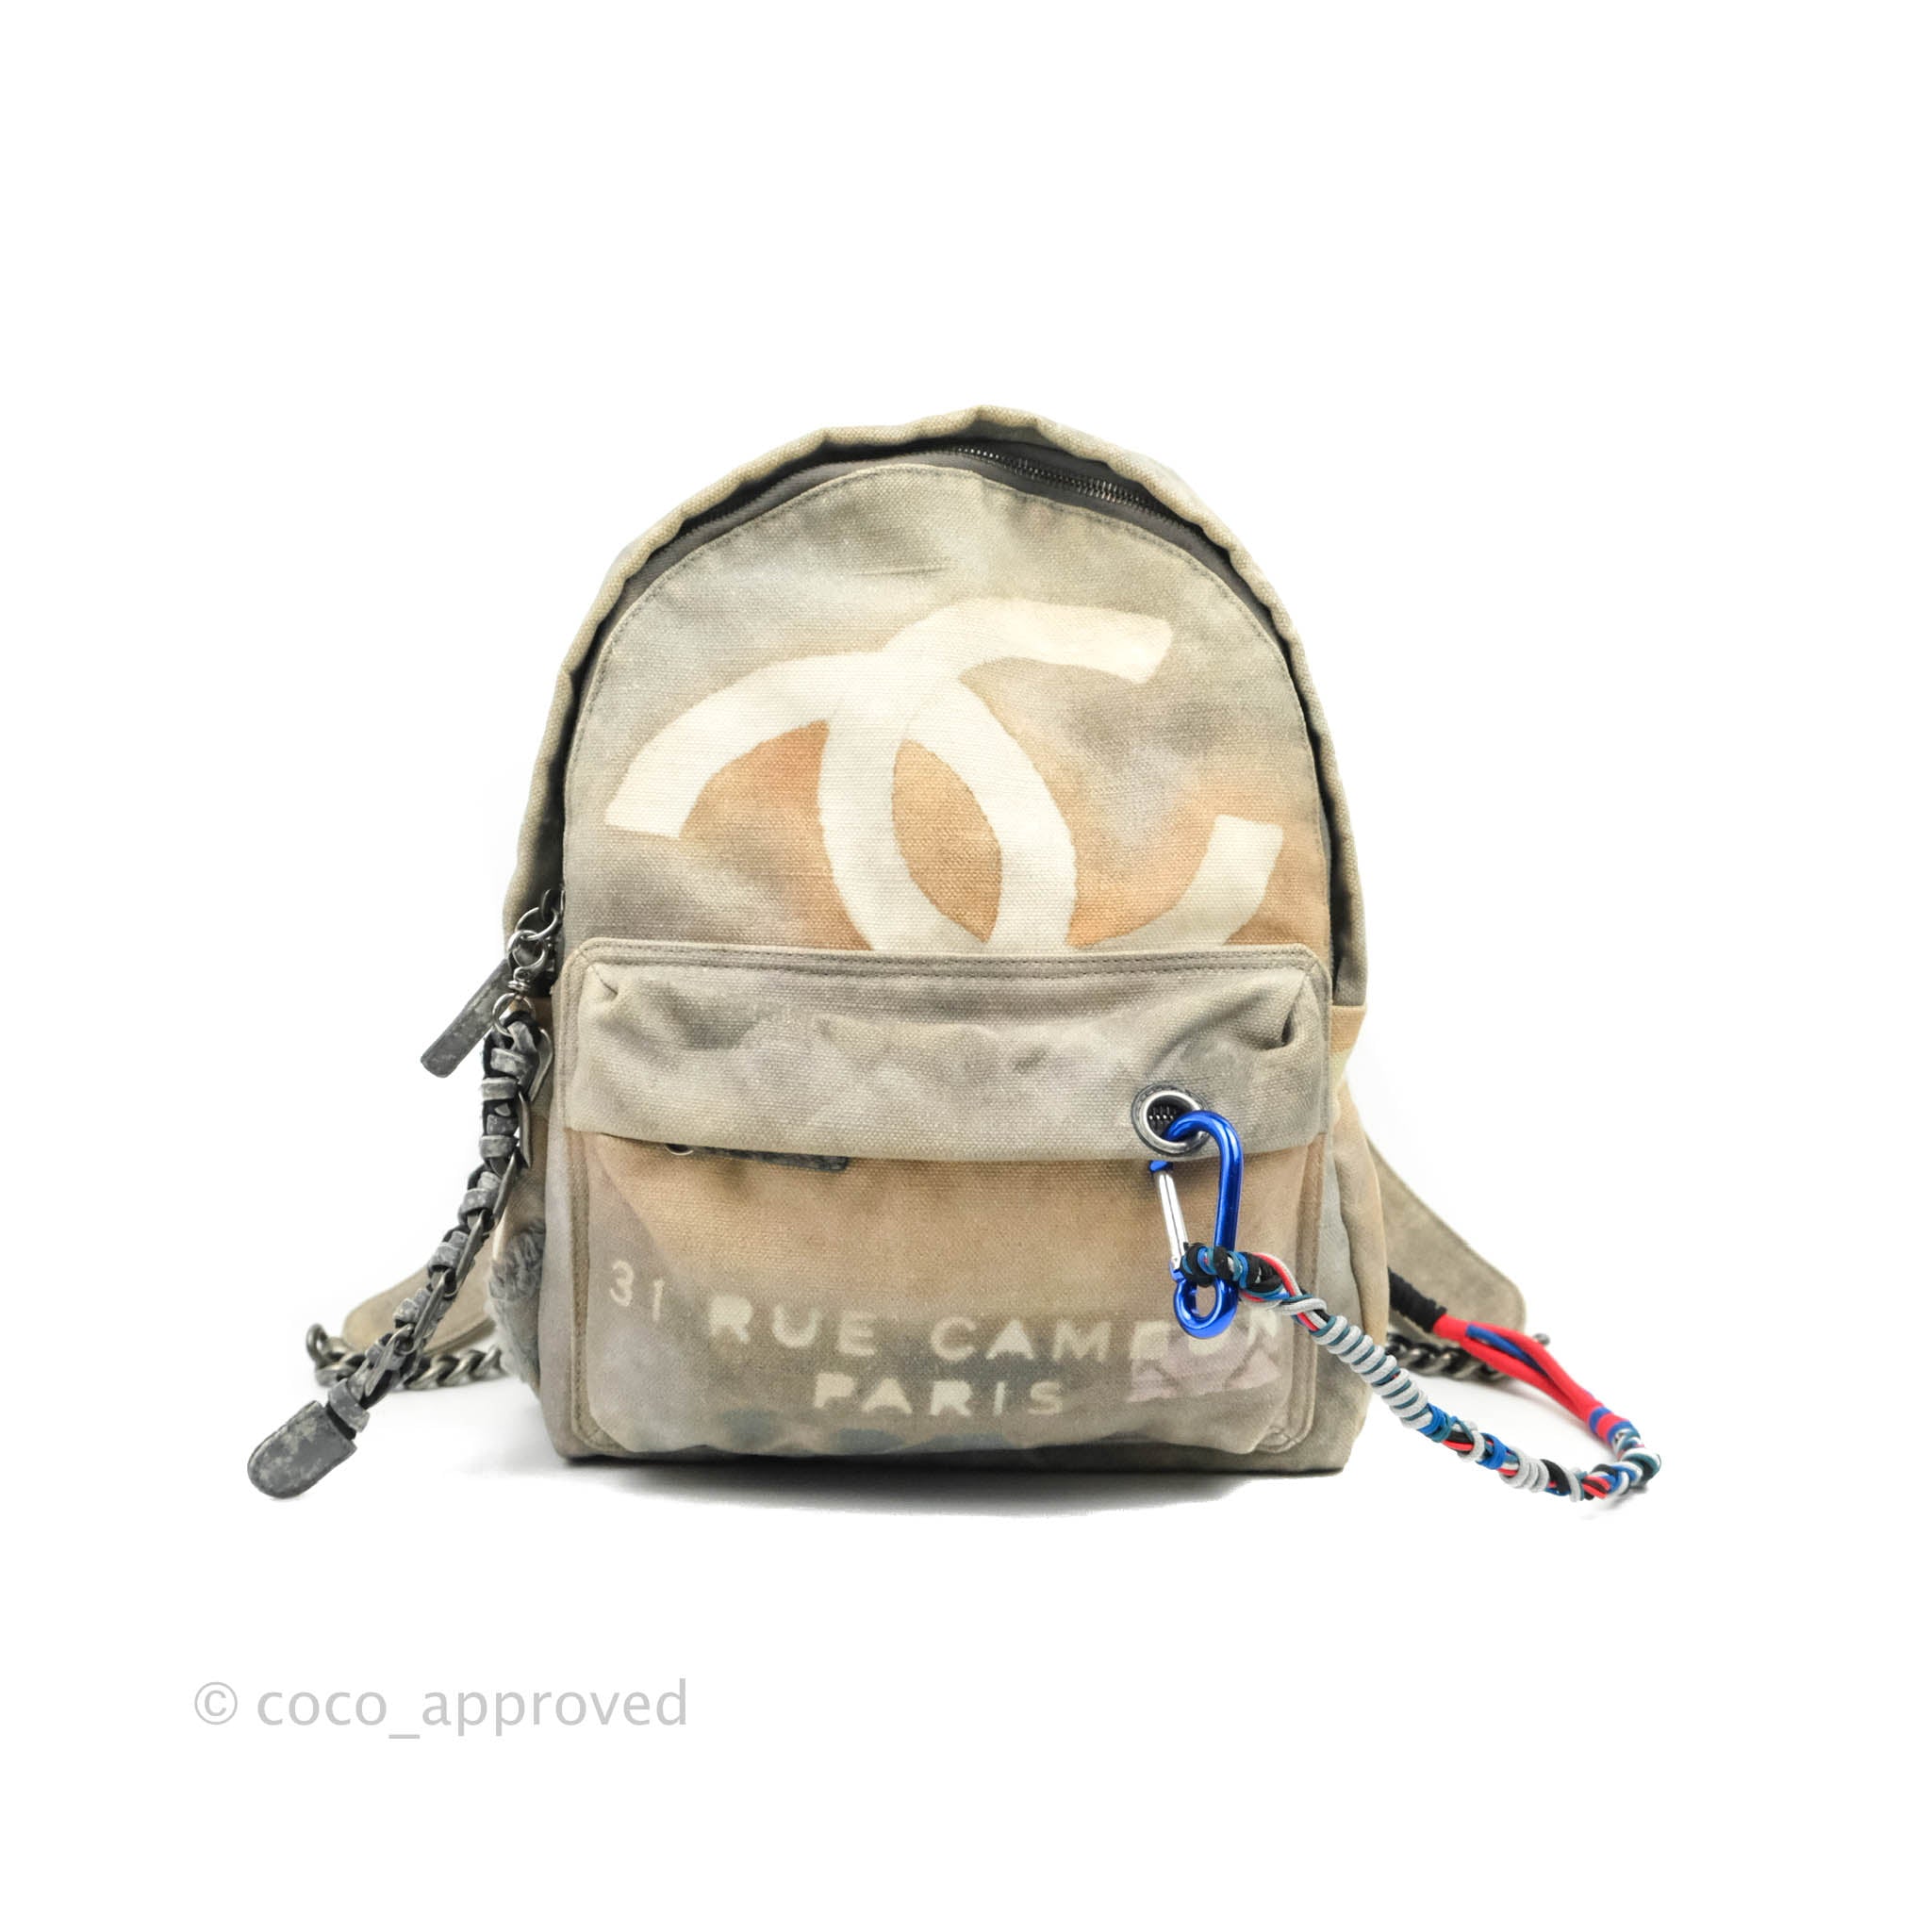 Miley Cyrus Carries the Infamous Chanel Graffiti Backpack - PurseBlog